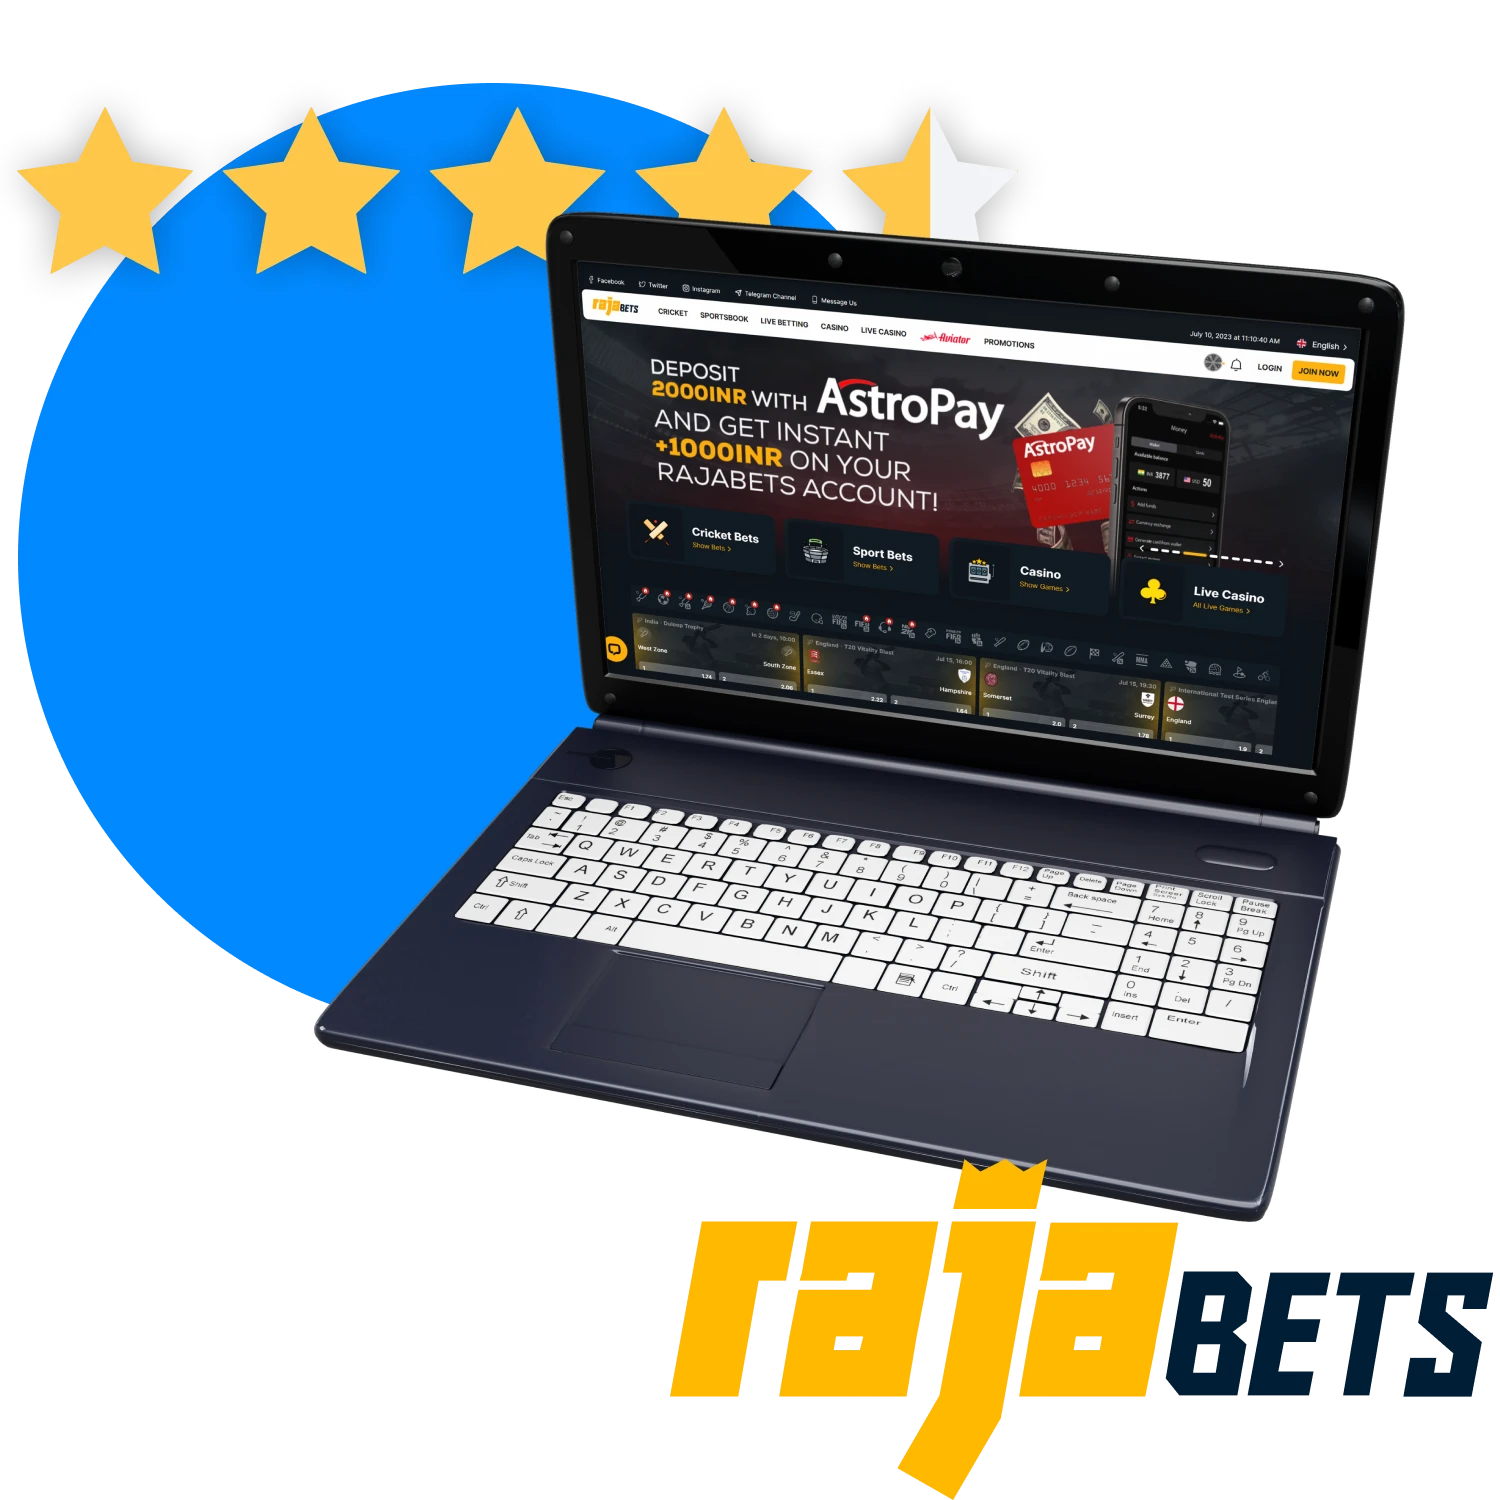 Check out what users think about the Rajabets website.